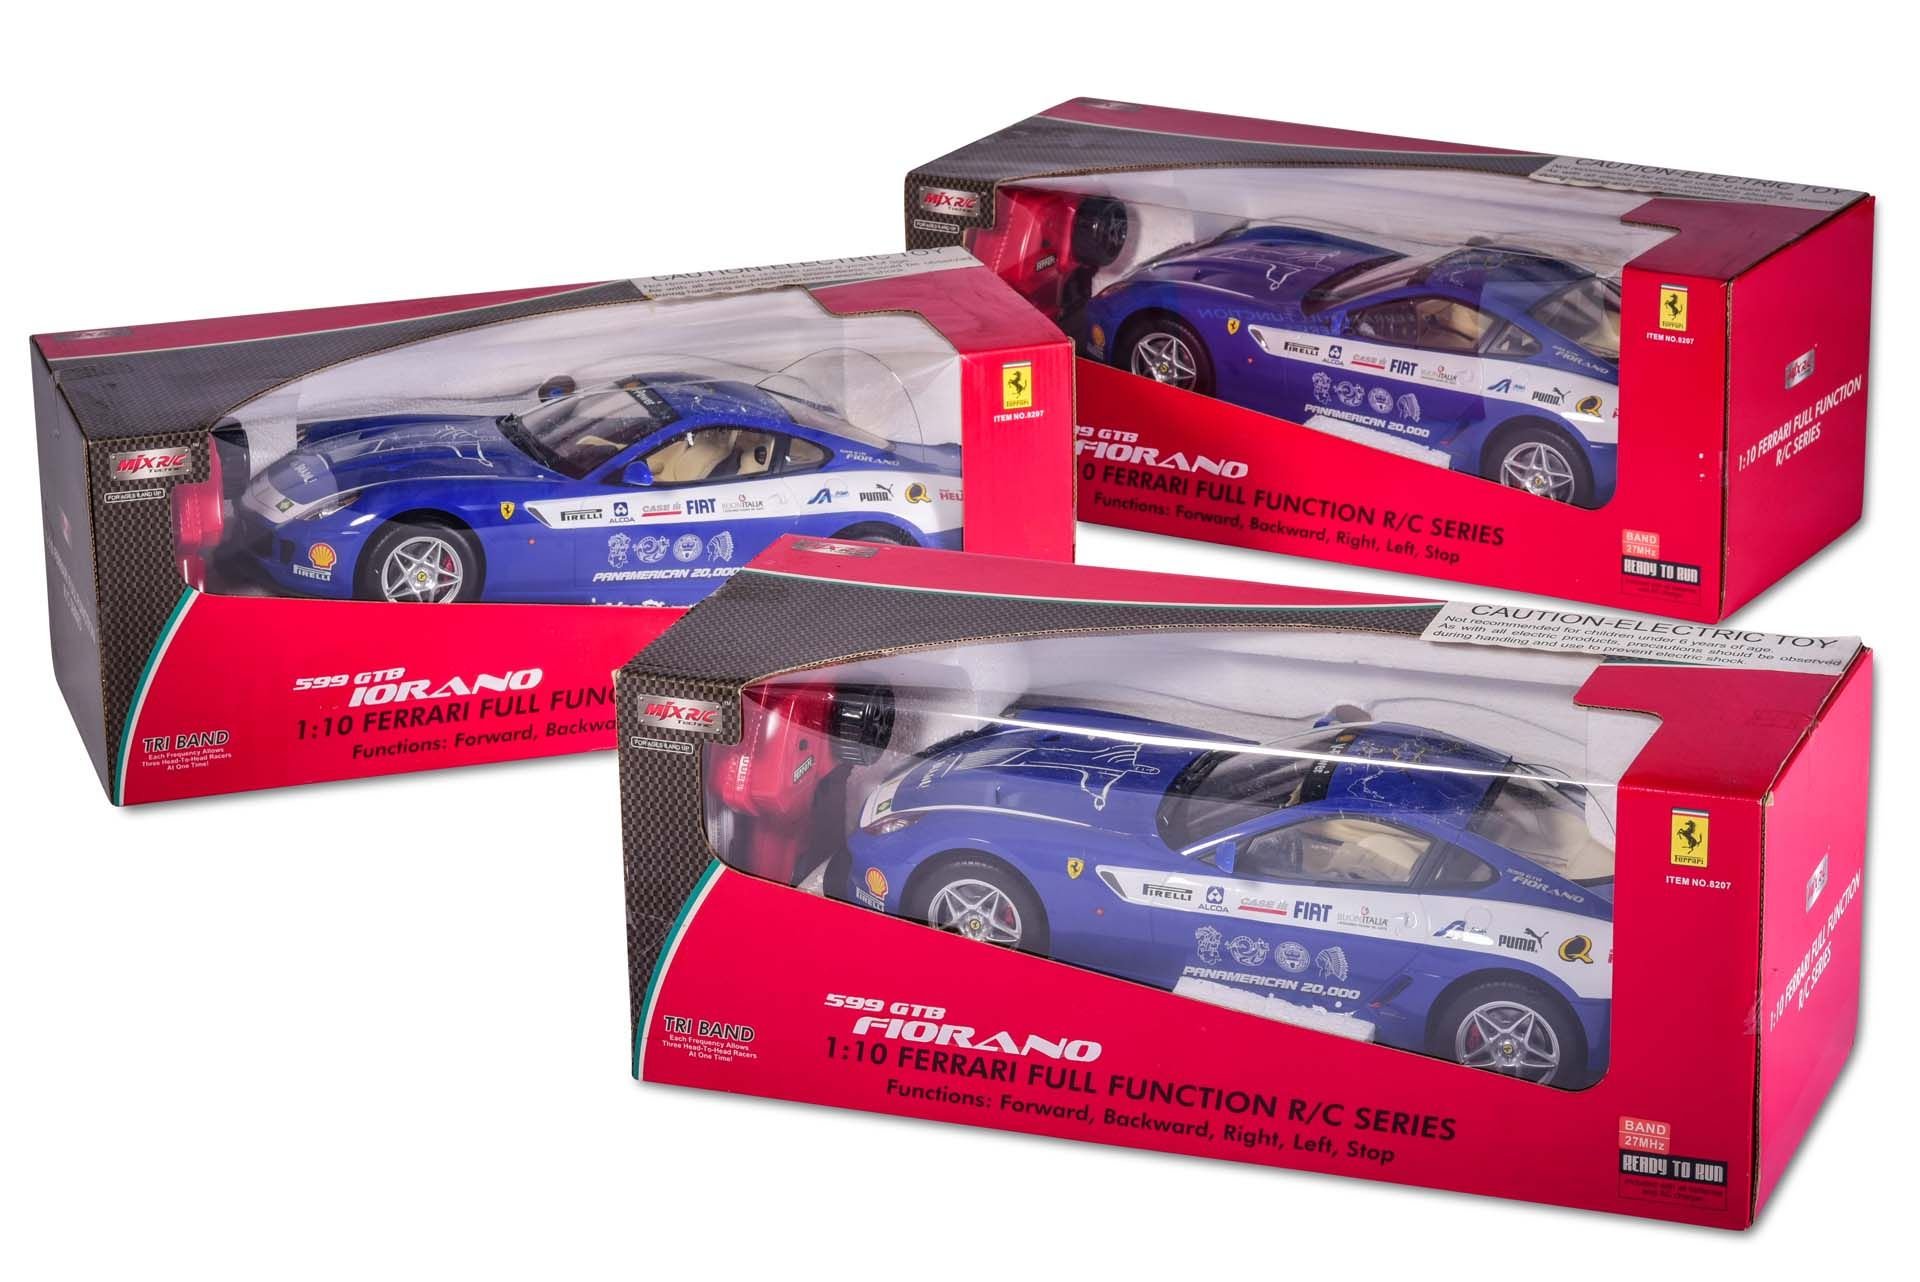 For Sale Group of three '1:10 Scale R/C Model of The Ferrari 599 Panamerican Car'